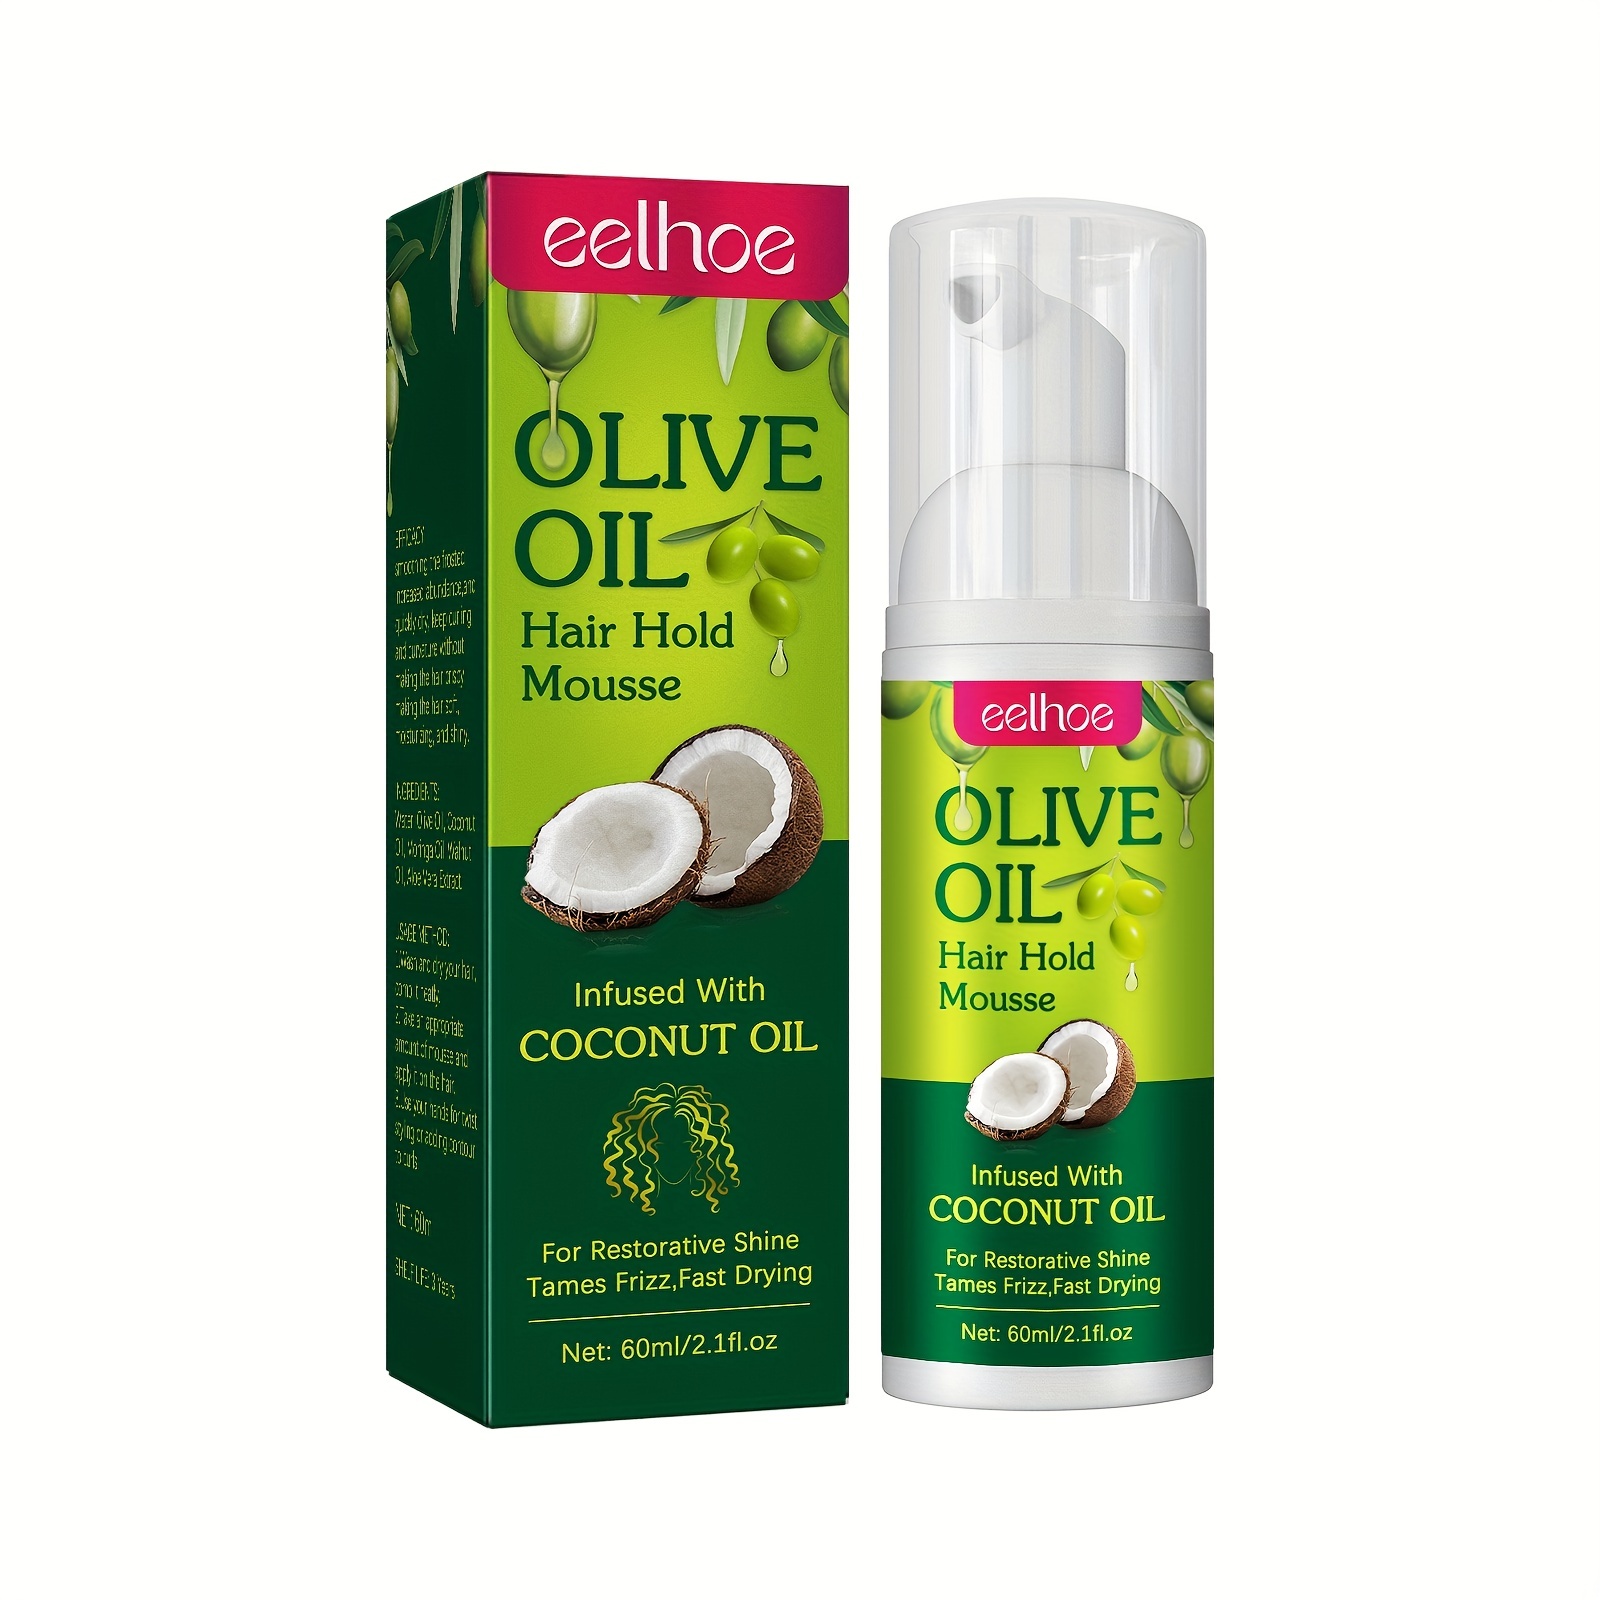 

Olive Oil Hair Hold Mousse, Long-lasting Anti-frizz Hair Mousse With Olive Oil For Curly Hair Styling